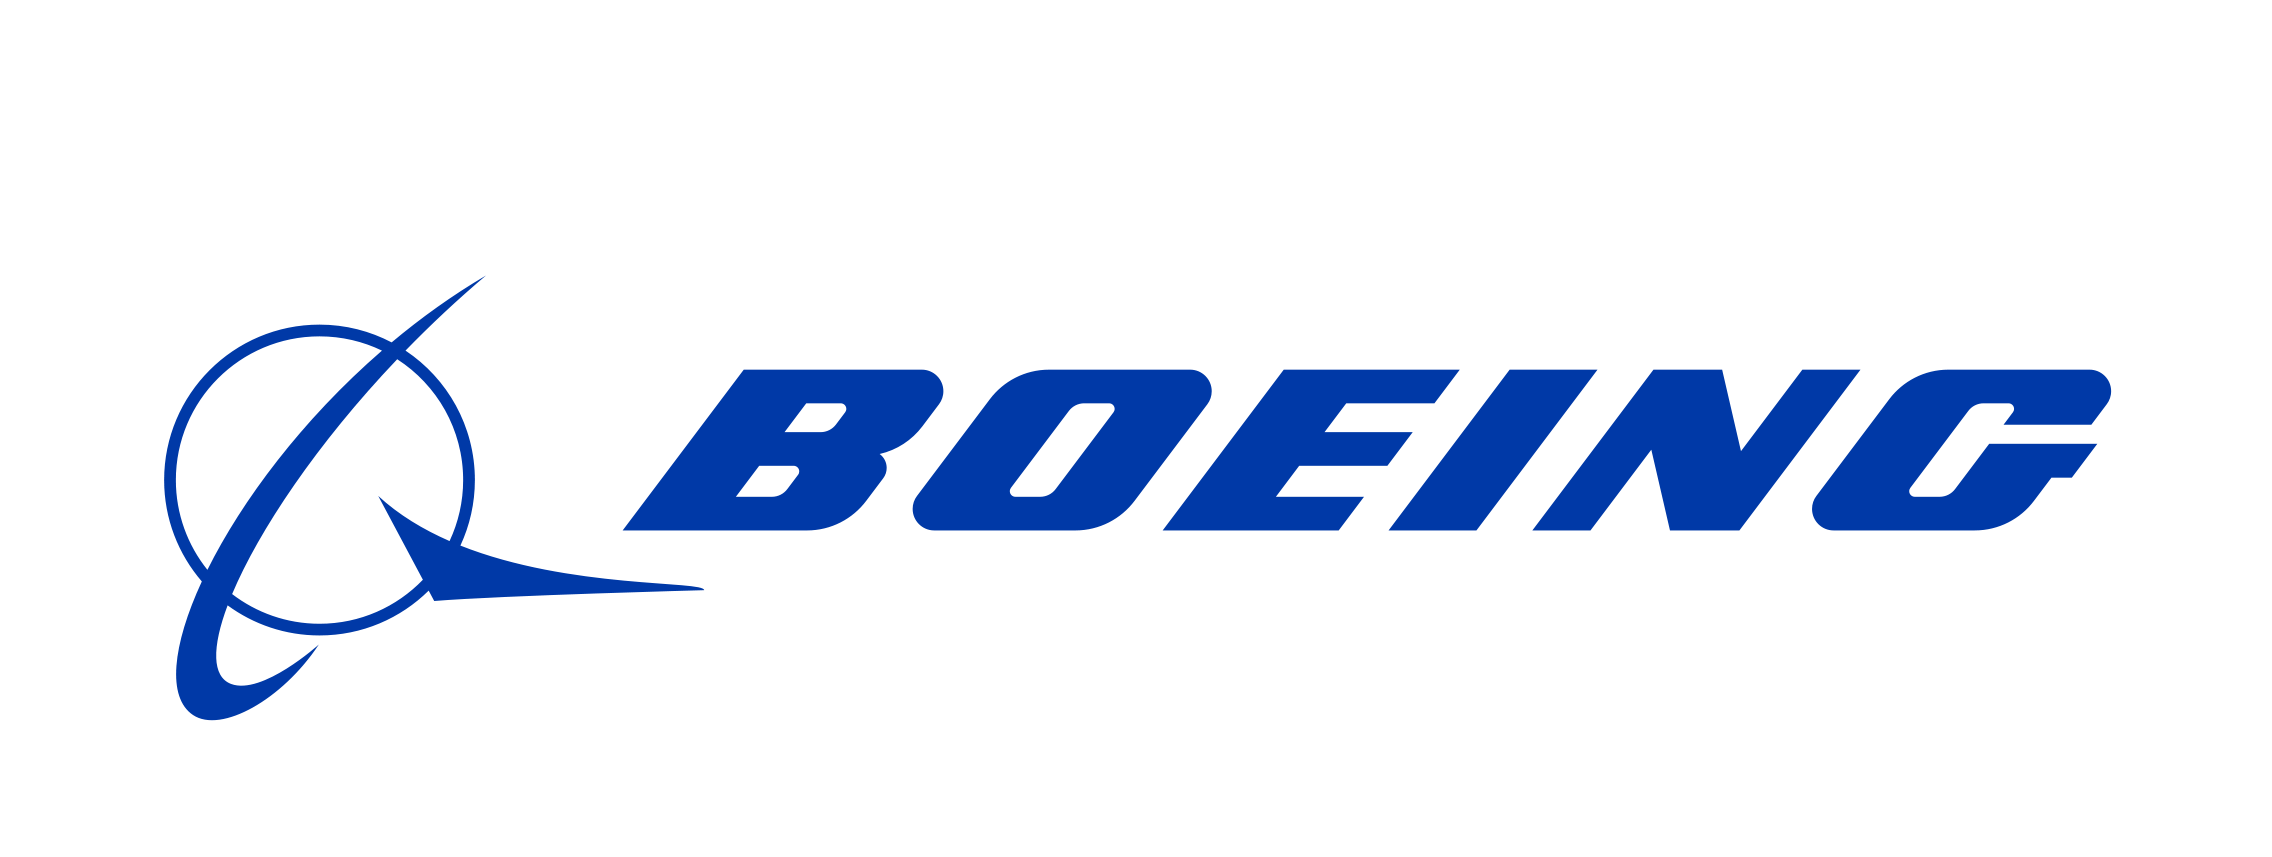 Boeing Logo - Boeing: Boeing Middle East - Home